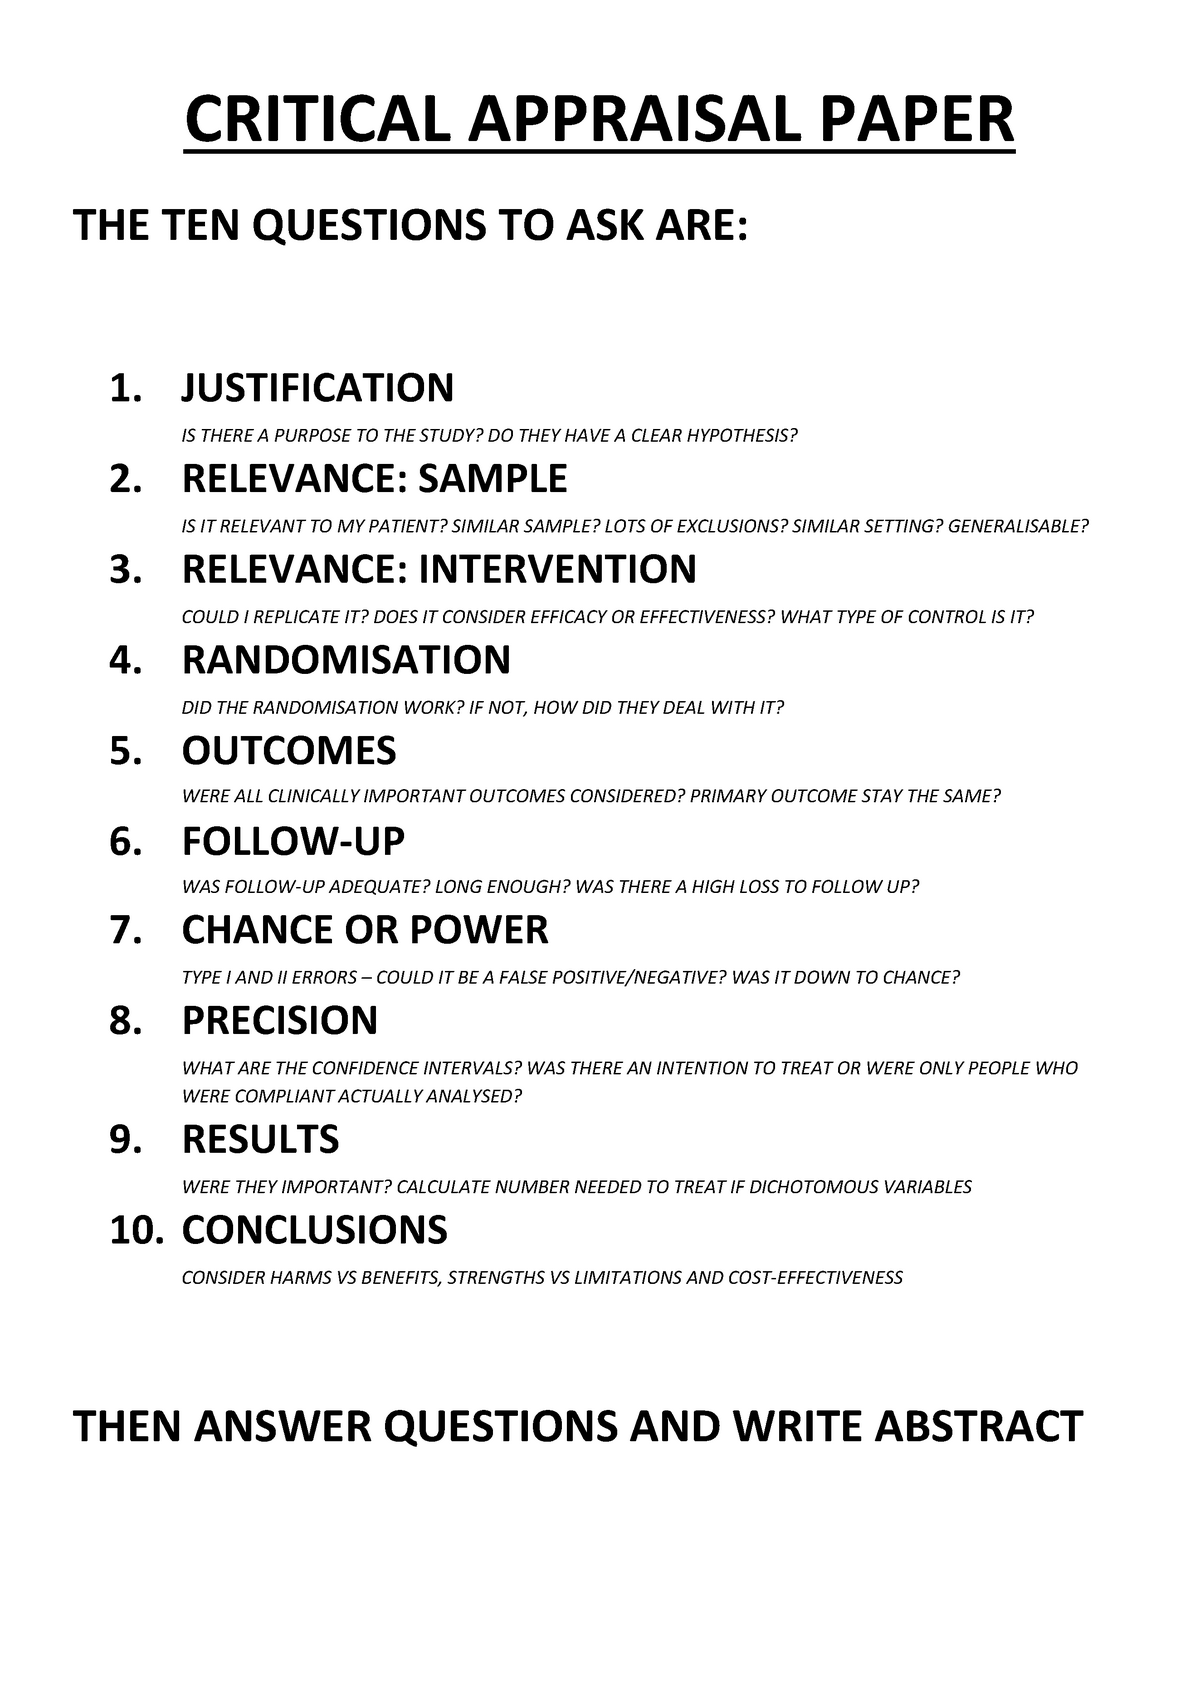 how to critically appraise research paper